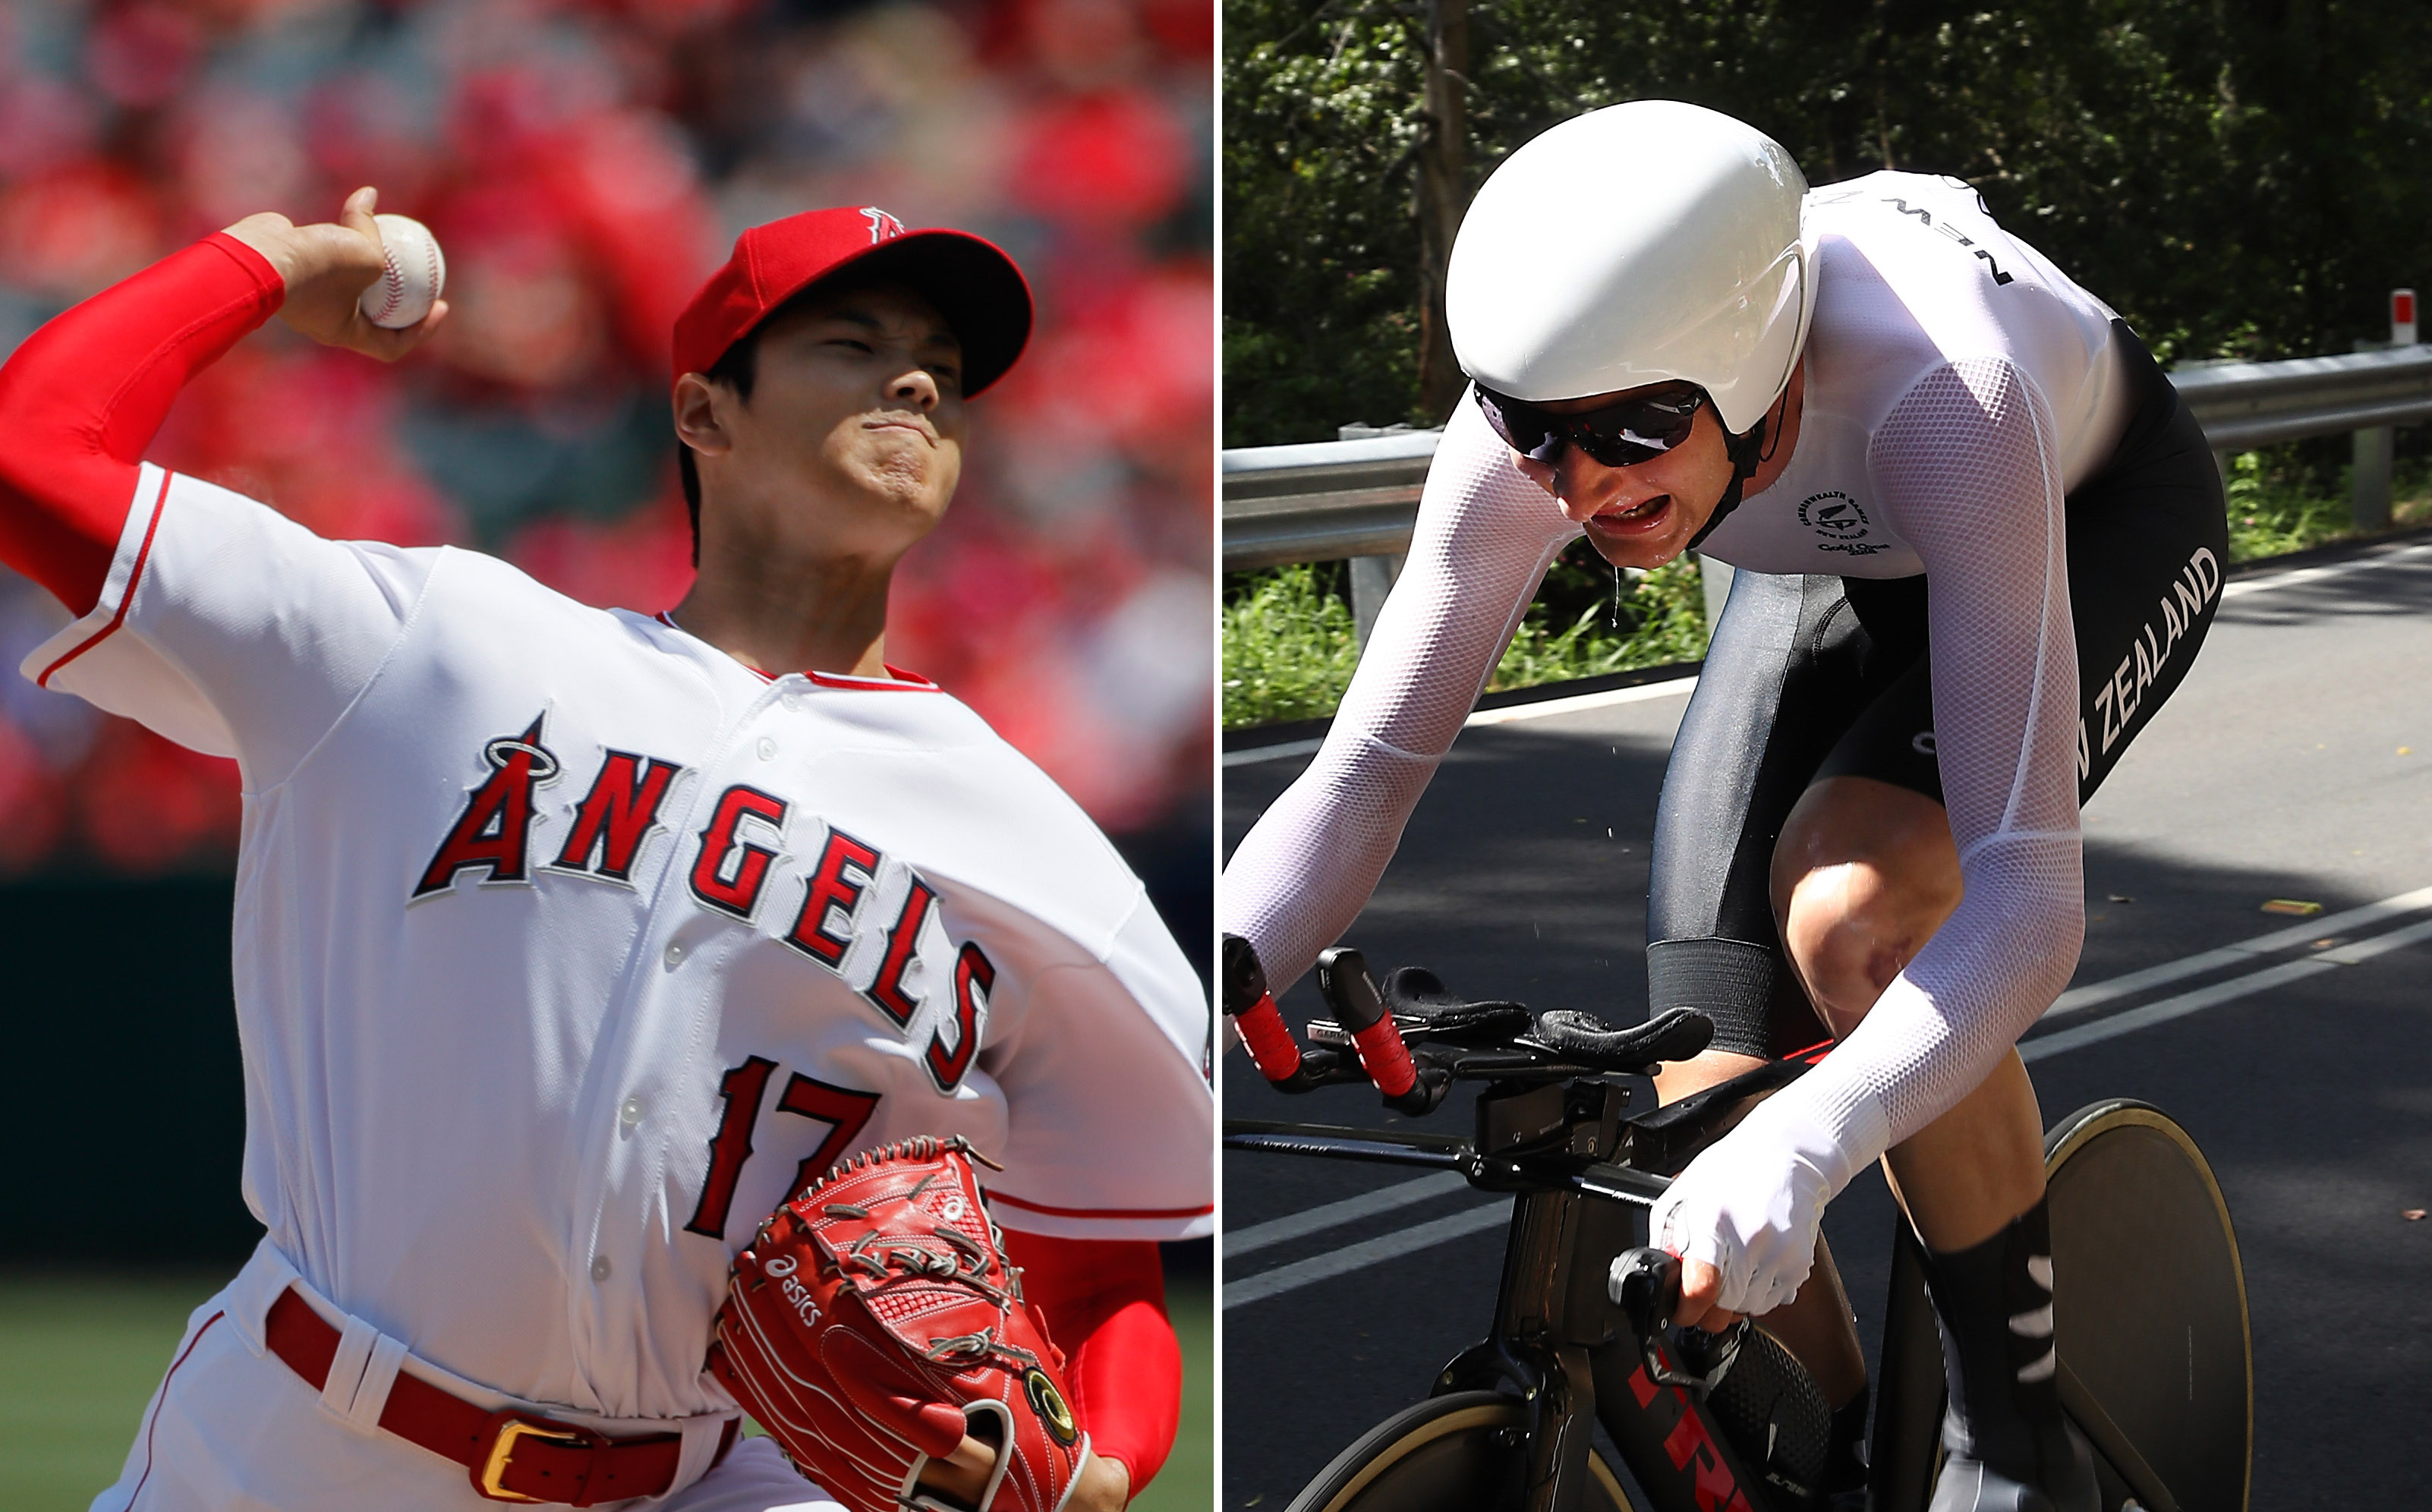 Shohei Ohtani flirts with a cycle while pitching in Angels